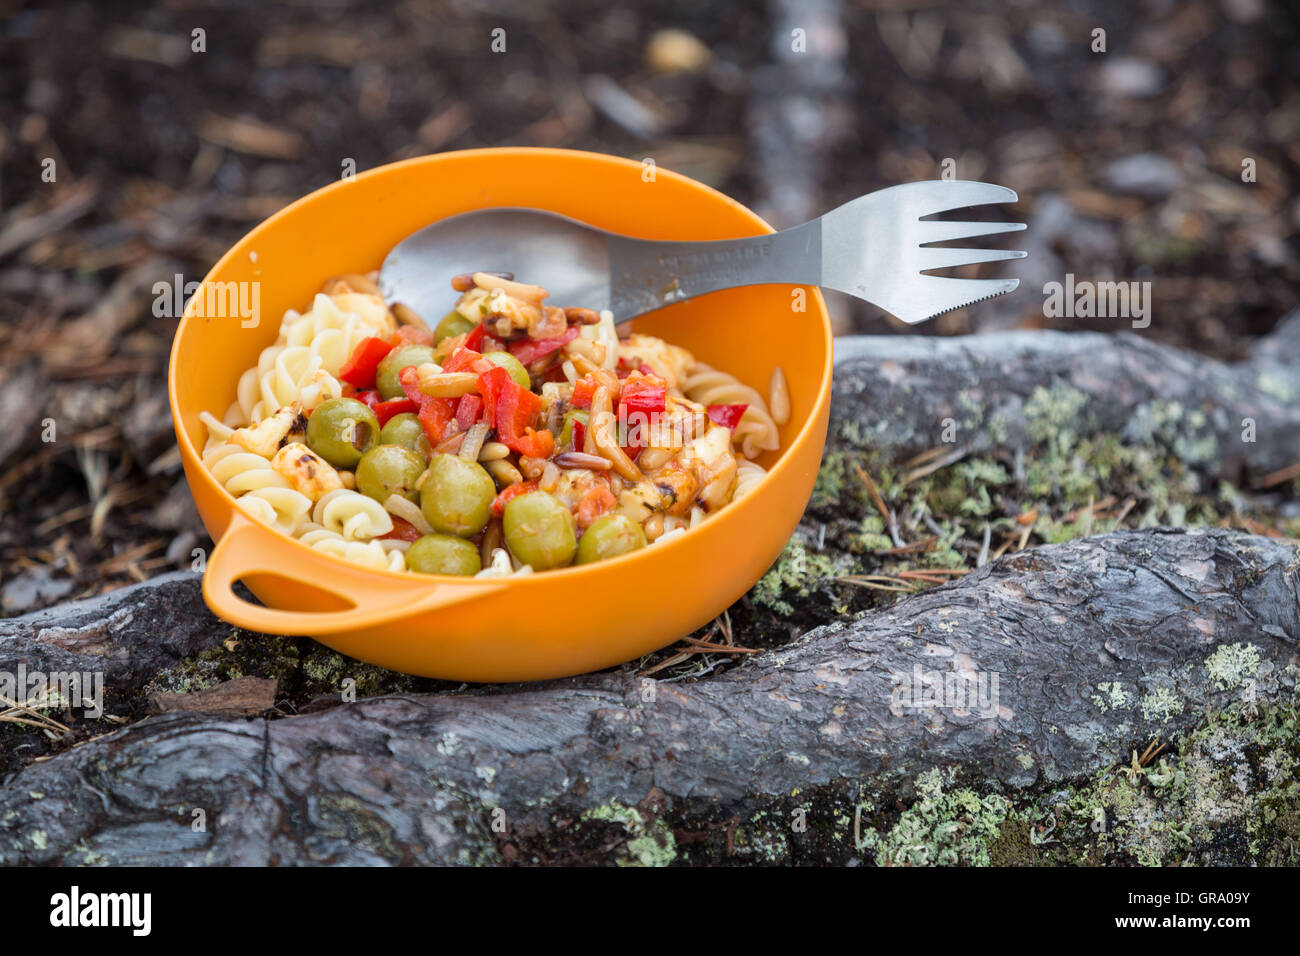 Plastic Bowl With Pasta And Olives As Food During Outdoor Activity Stock Photo